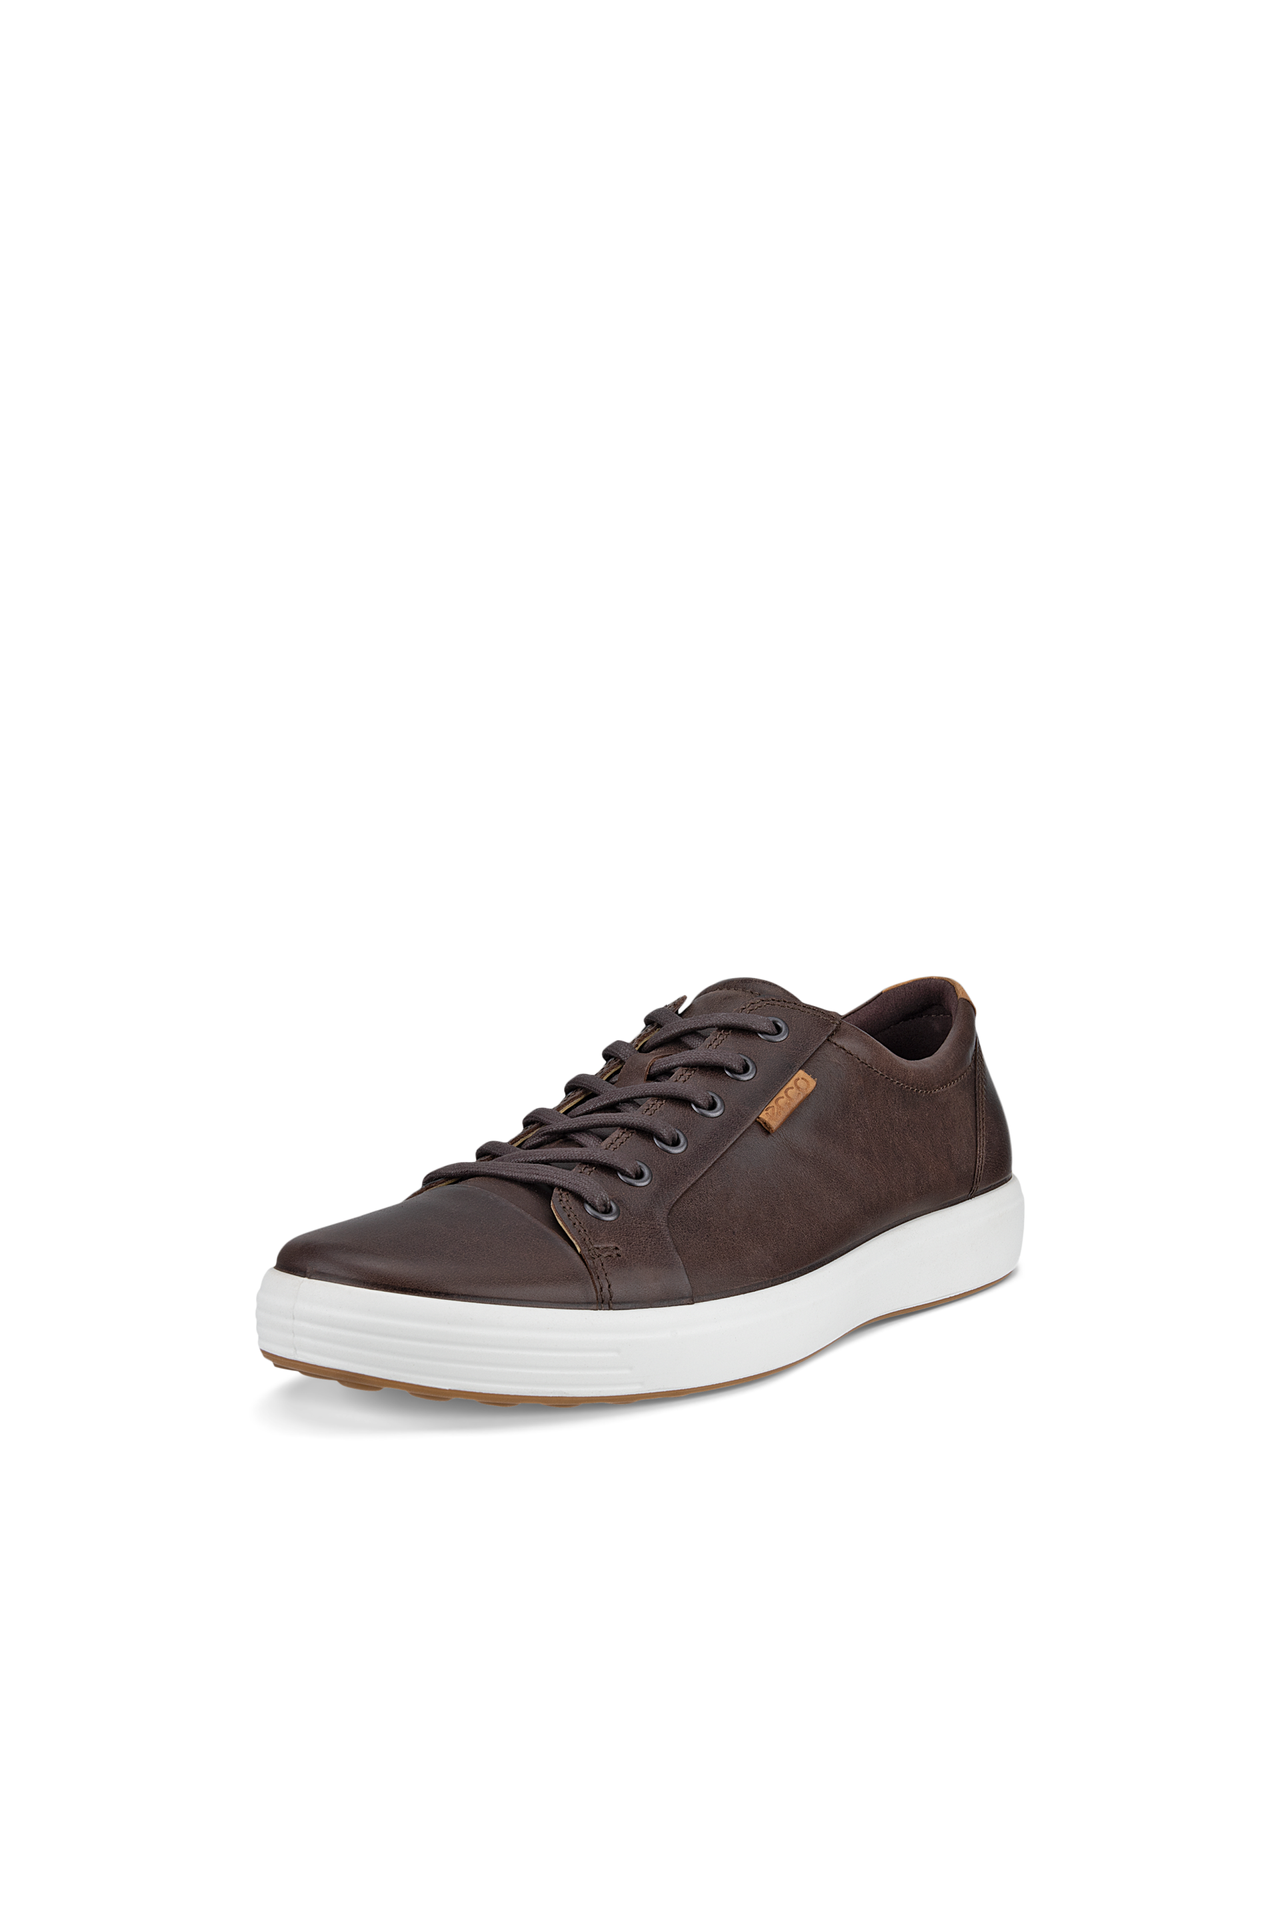 Ecco 430004-50159 in brown leather